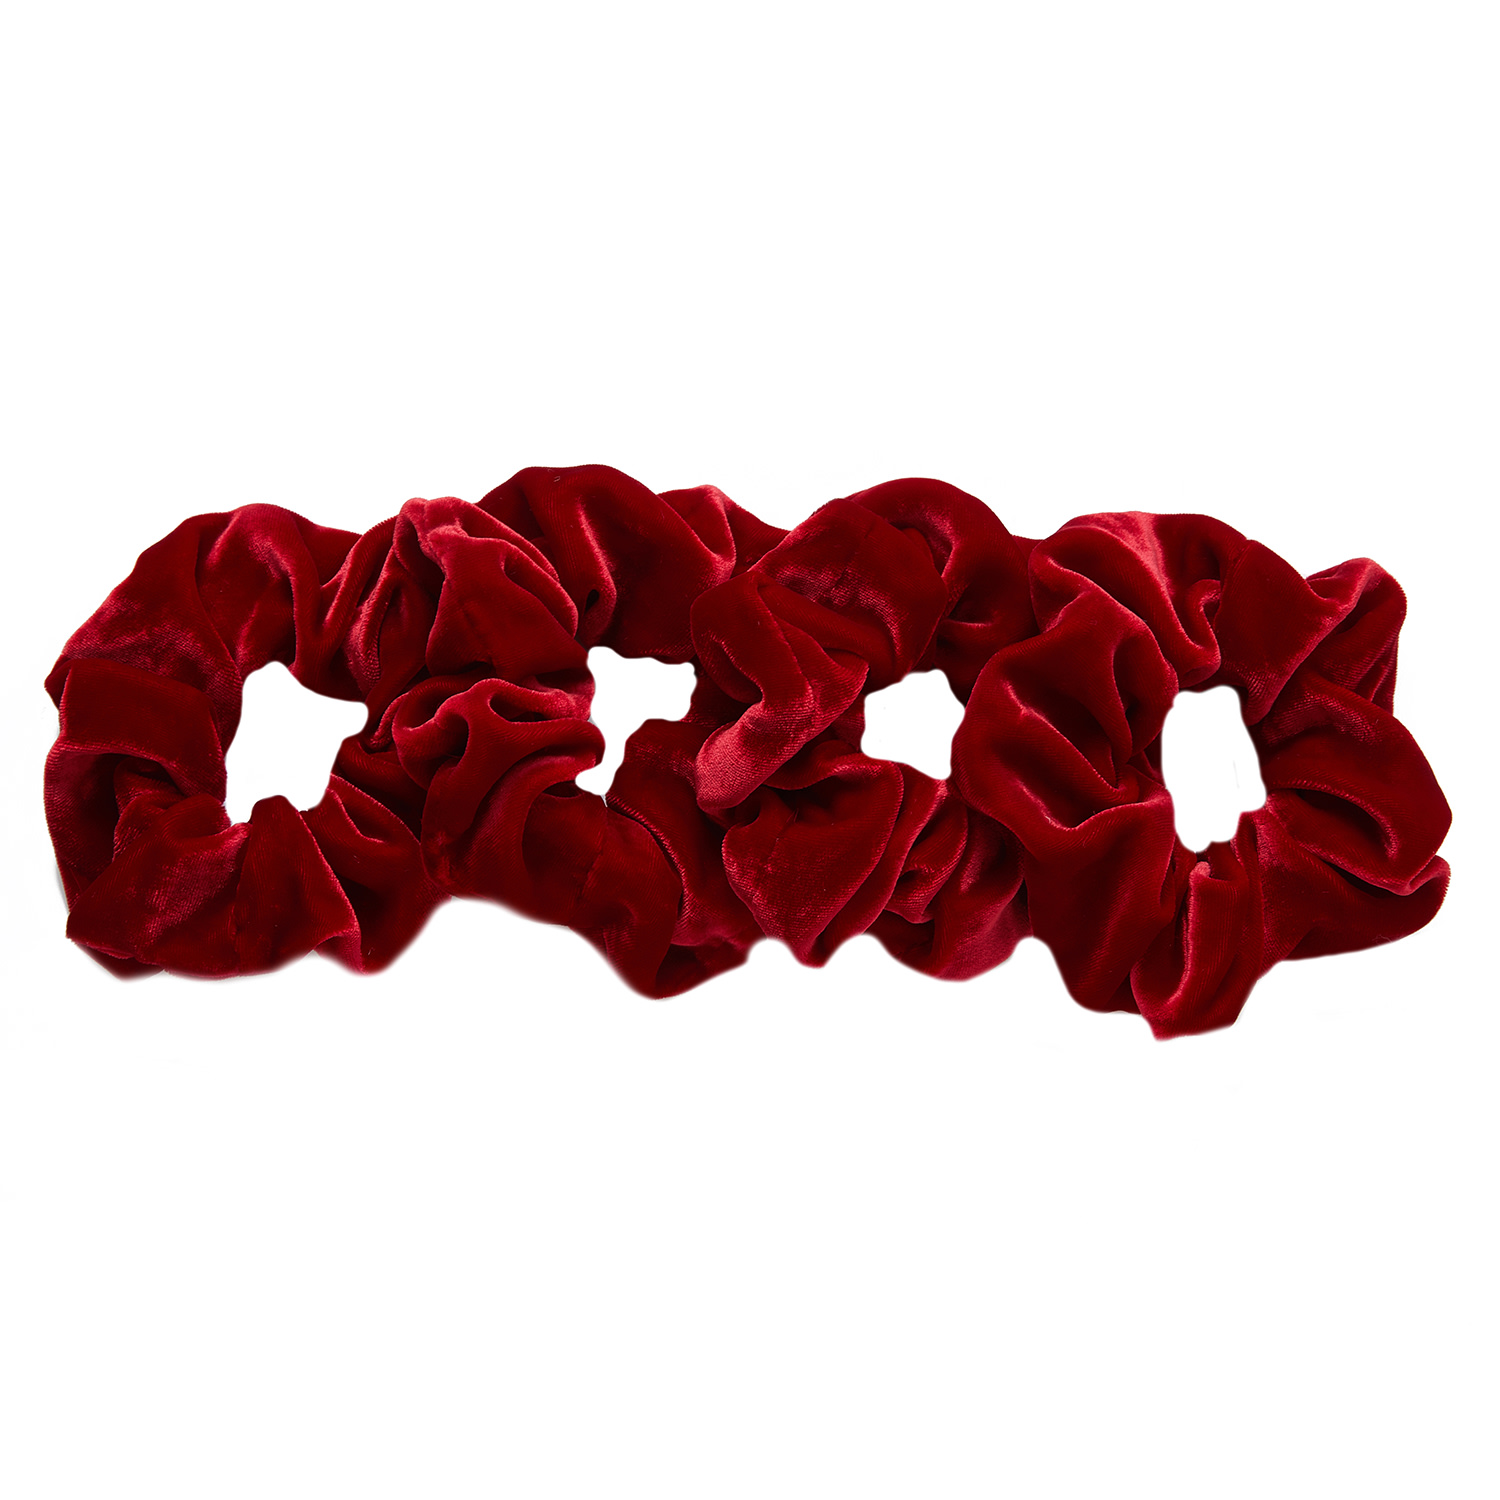 Women’s Red Silk Velvet Handmade French Scrunchie Set Of Four - Lipstick Collection In Dragon Blood One Size Soft Strokes Silk